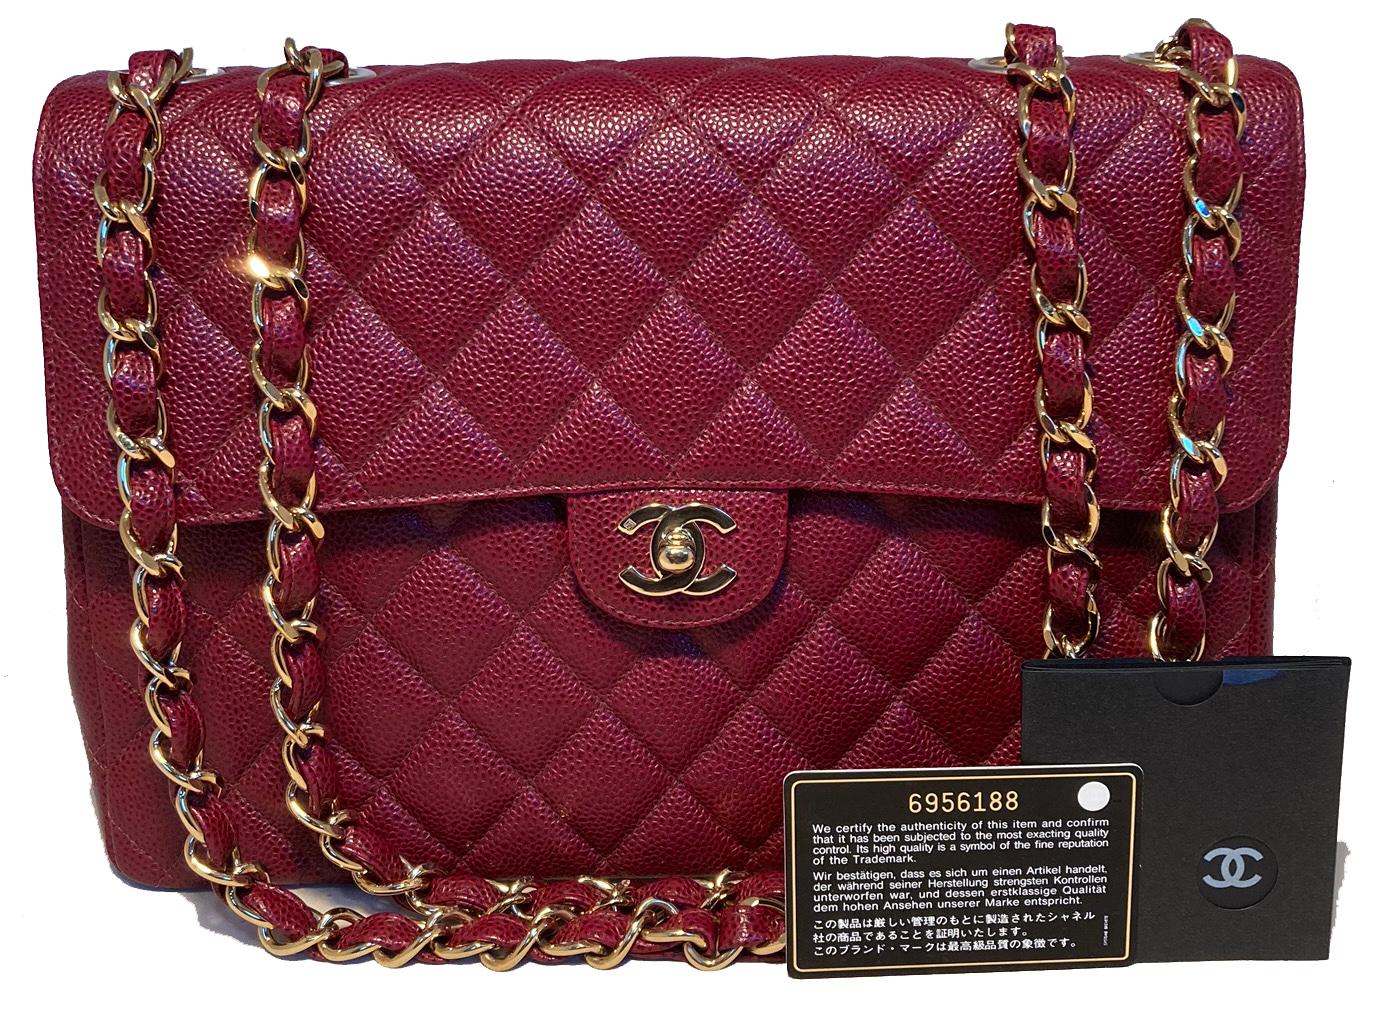 Chanel Maroon Quilted Caviar Leather Maxi Classic Flap Shoulder Bag 5